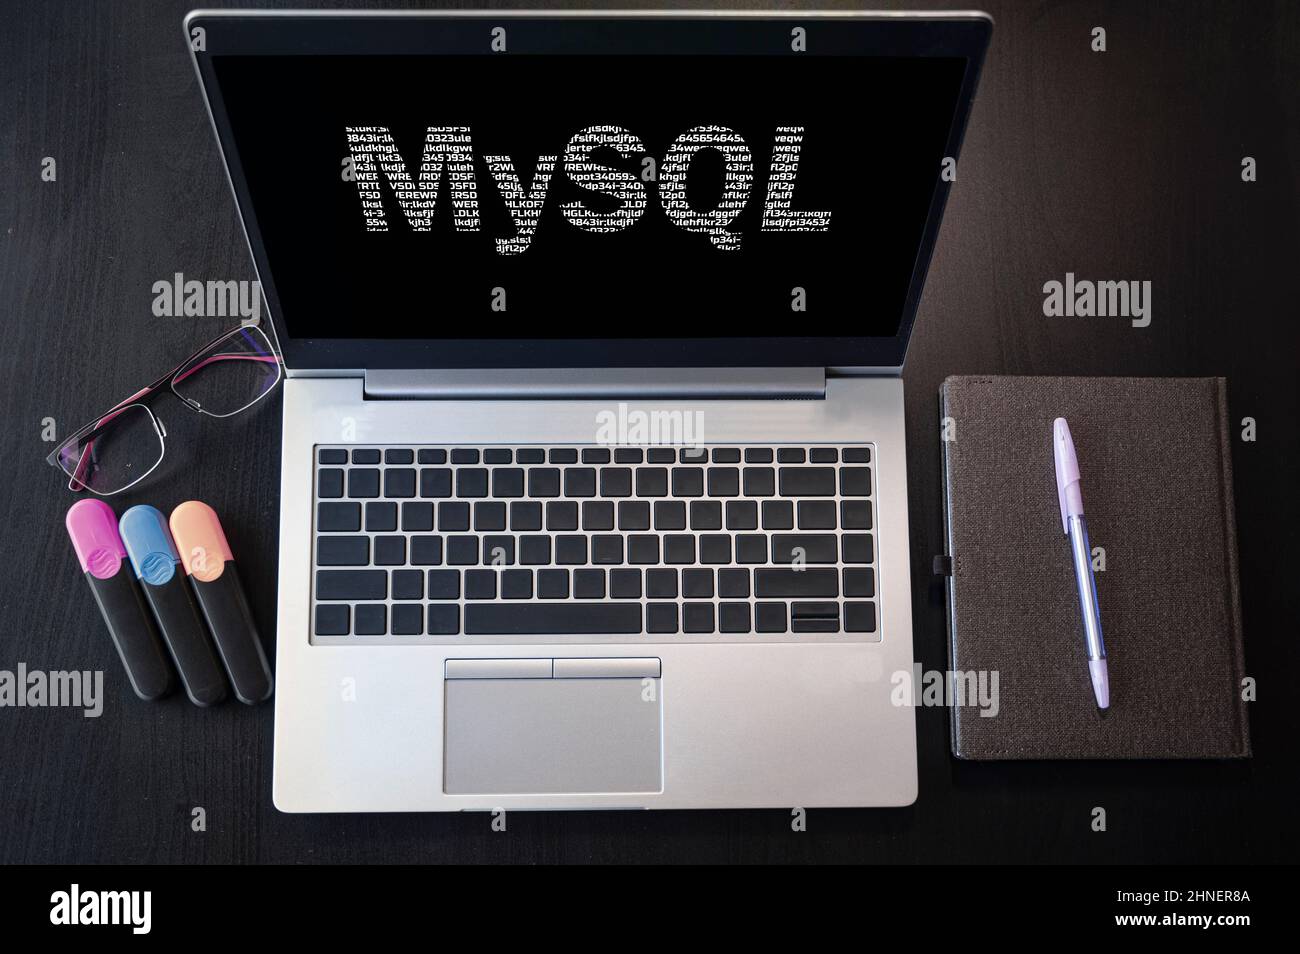 Top view of laptop with text MySQL. MySQL inscription on laptop screen and keyboard. Learn MySQL language, computer courses, training. Stock Photo